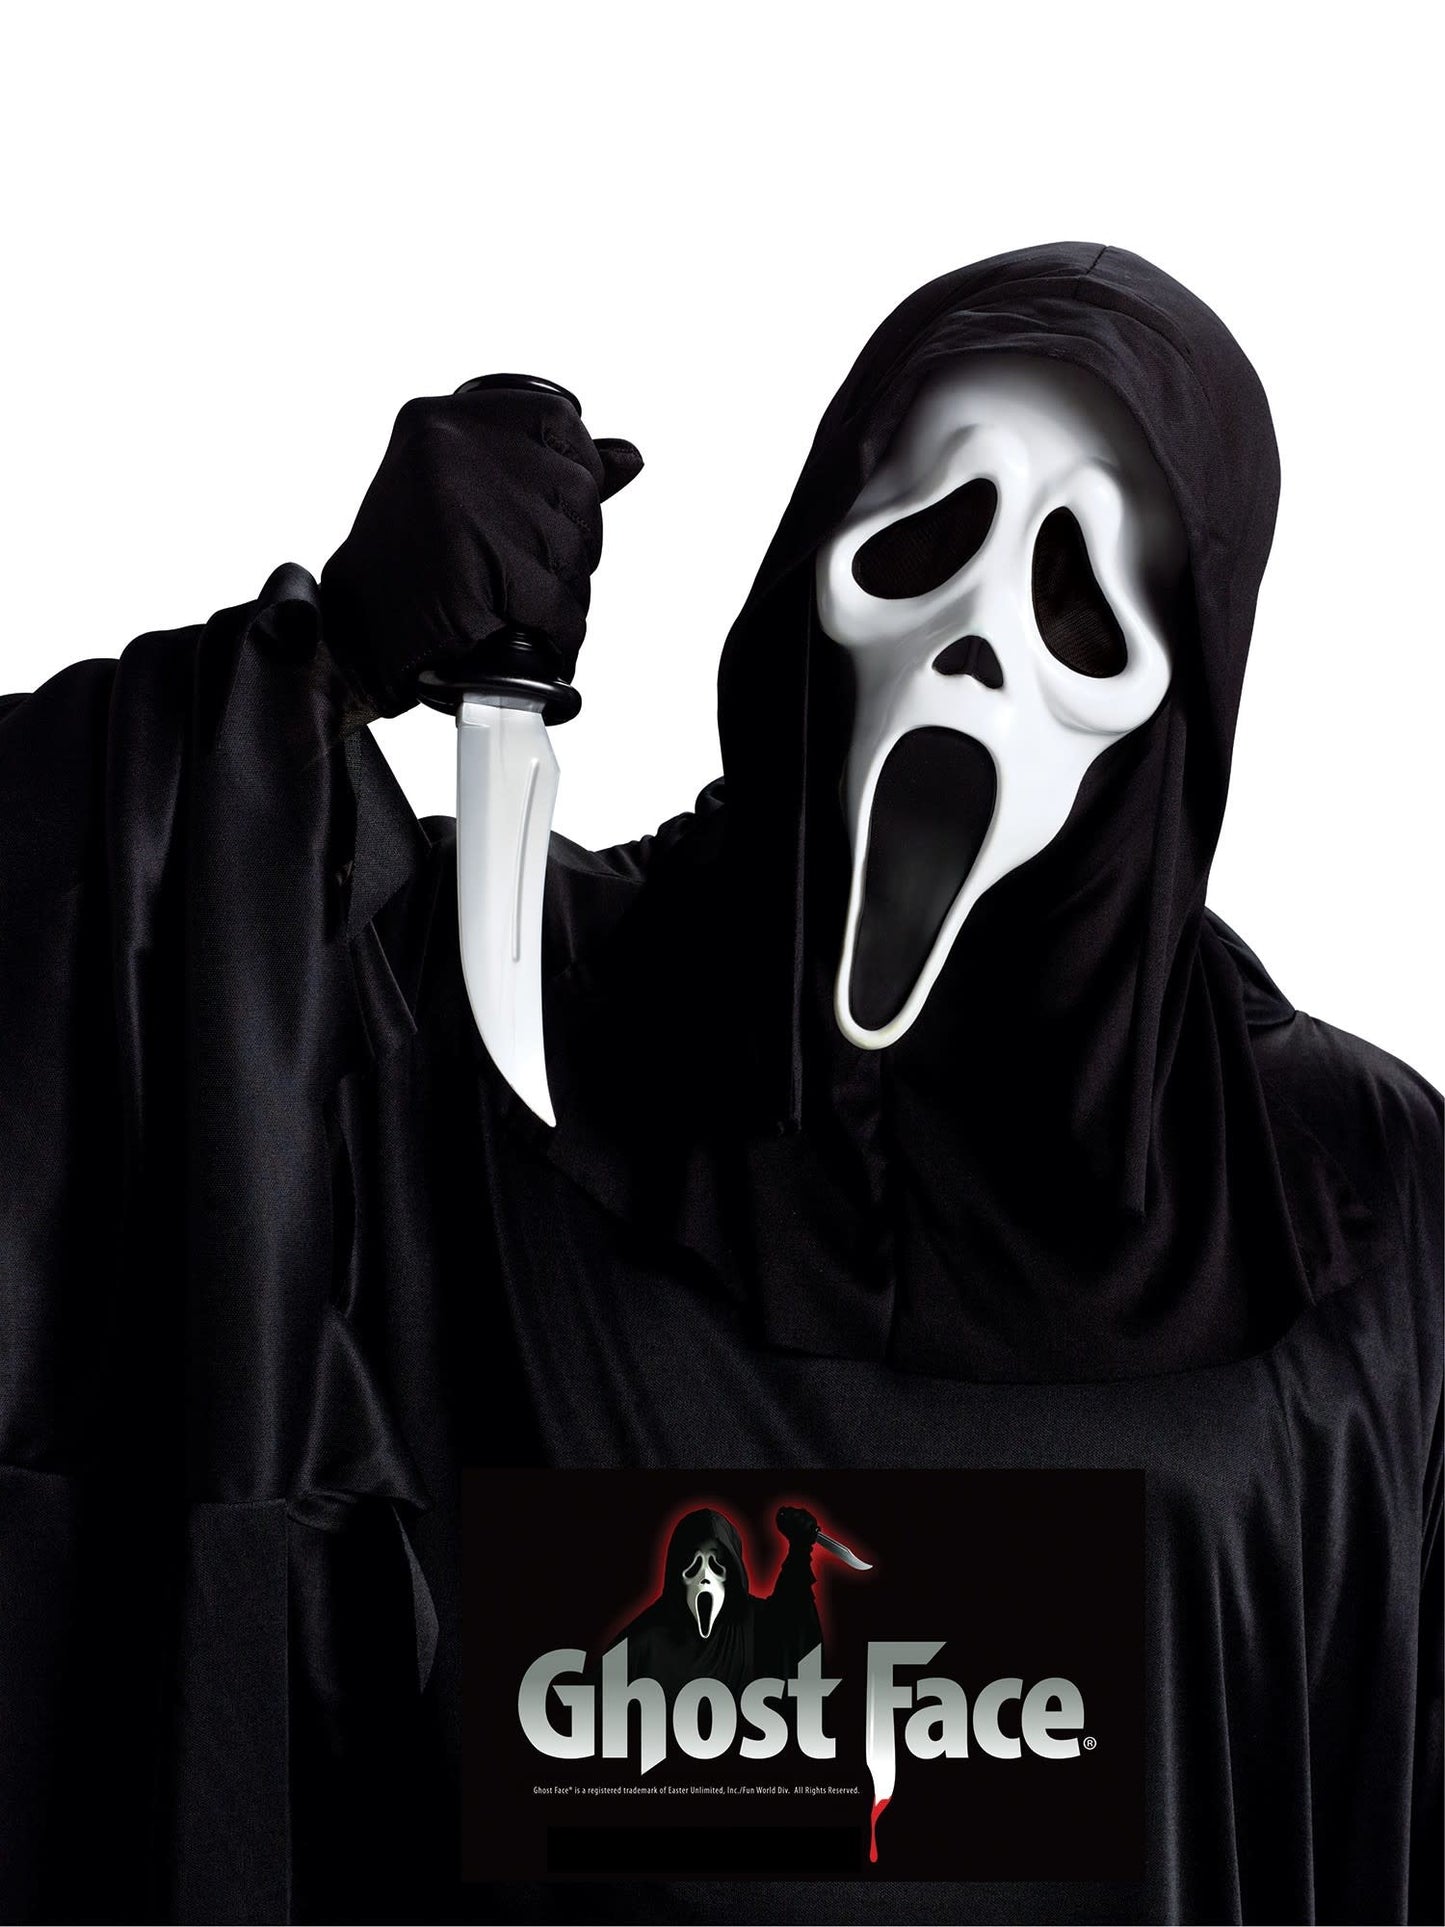 A Ghost Face costume mask.